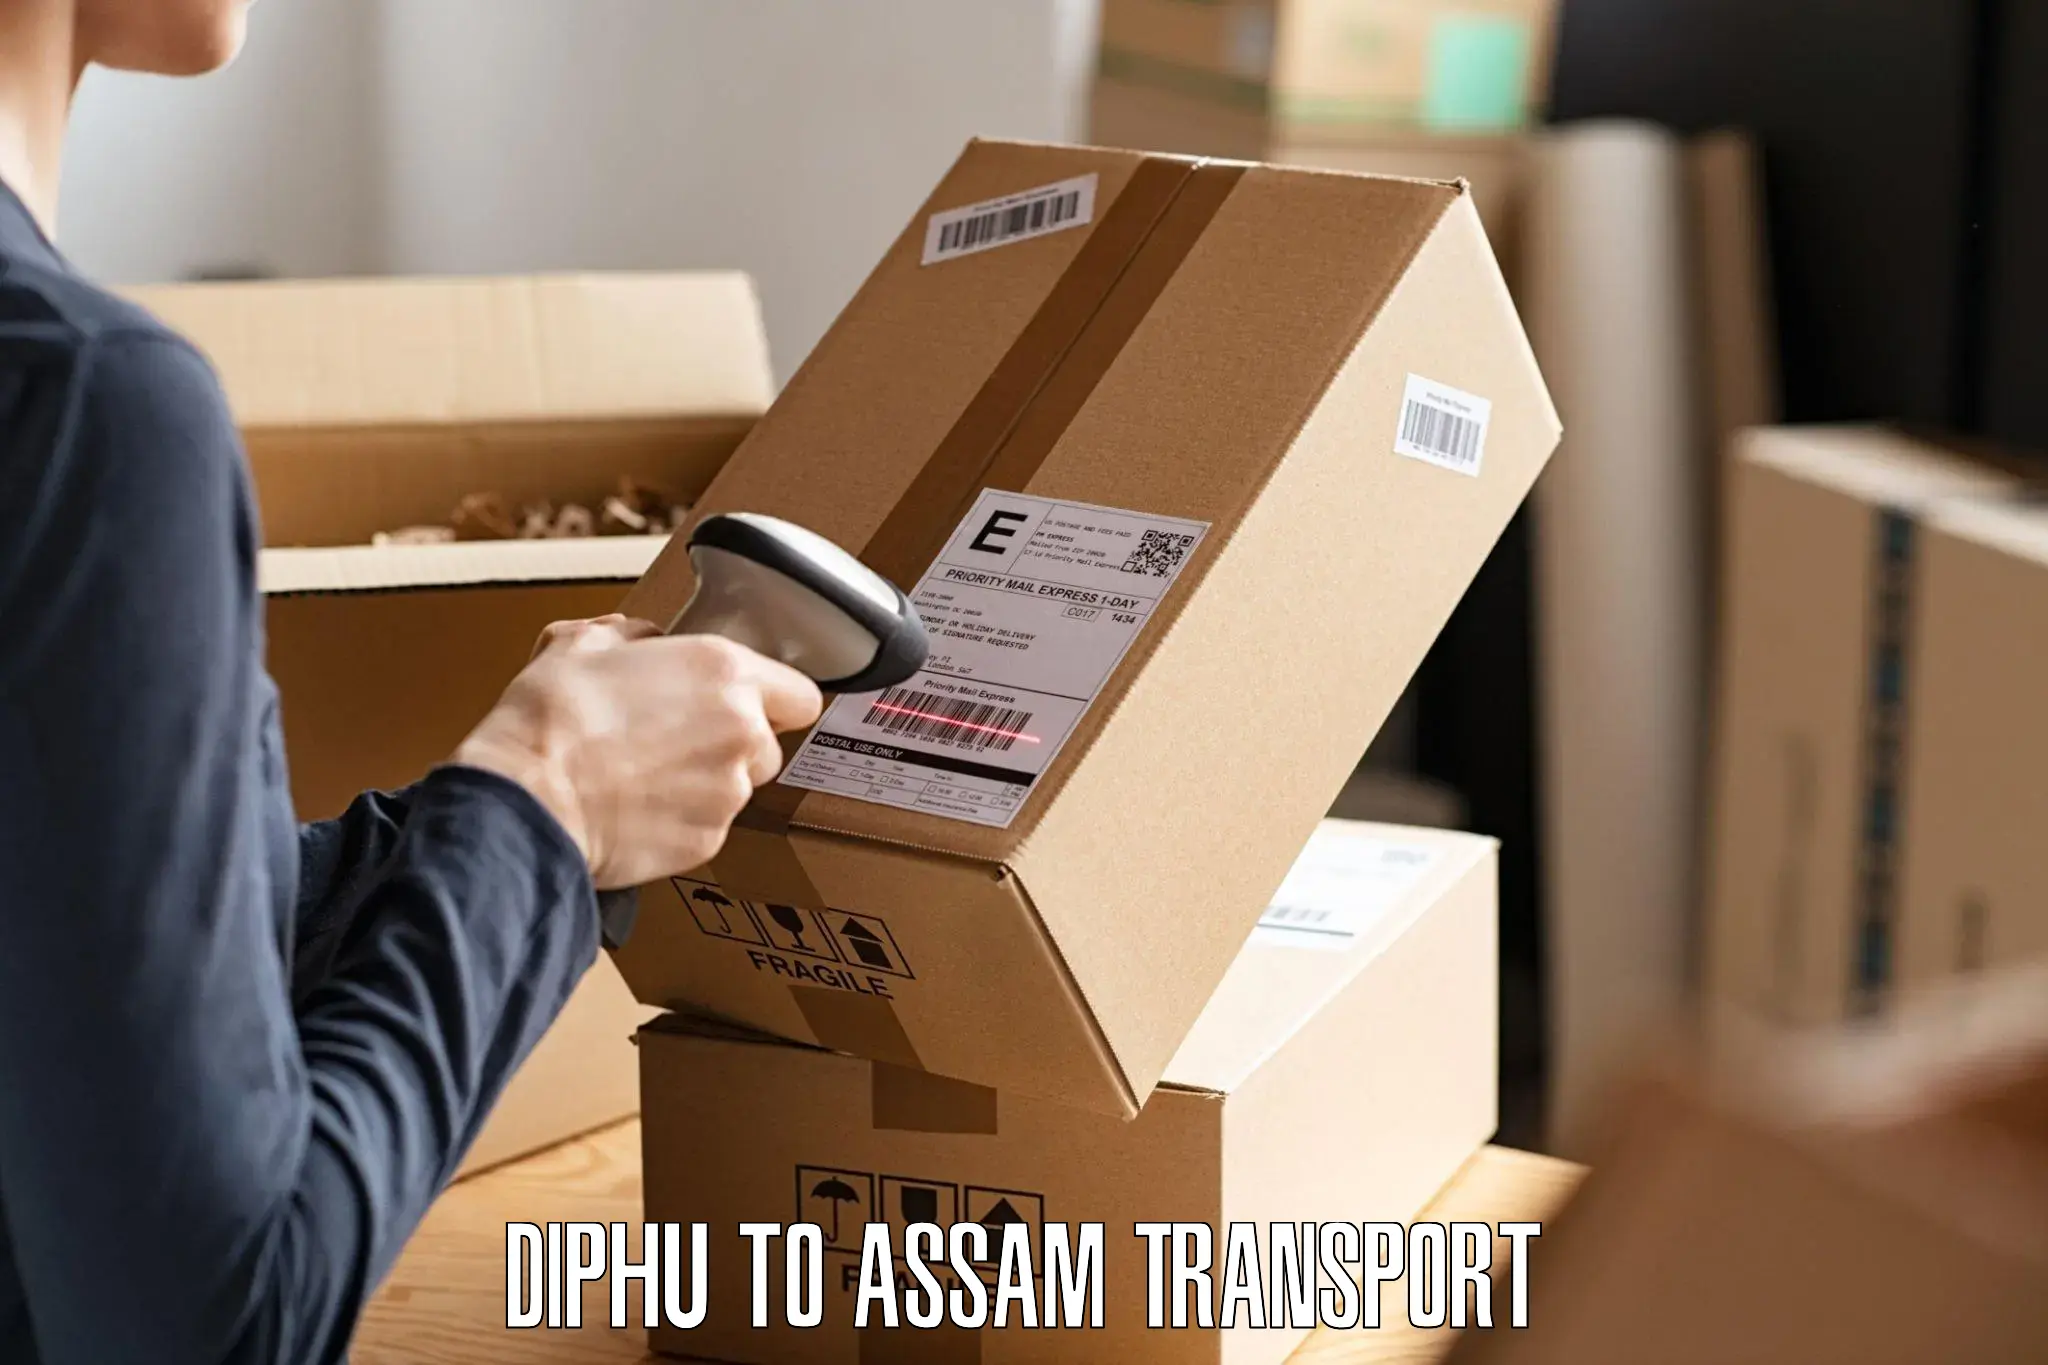 Express transport services Diphu to Noonmati